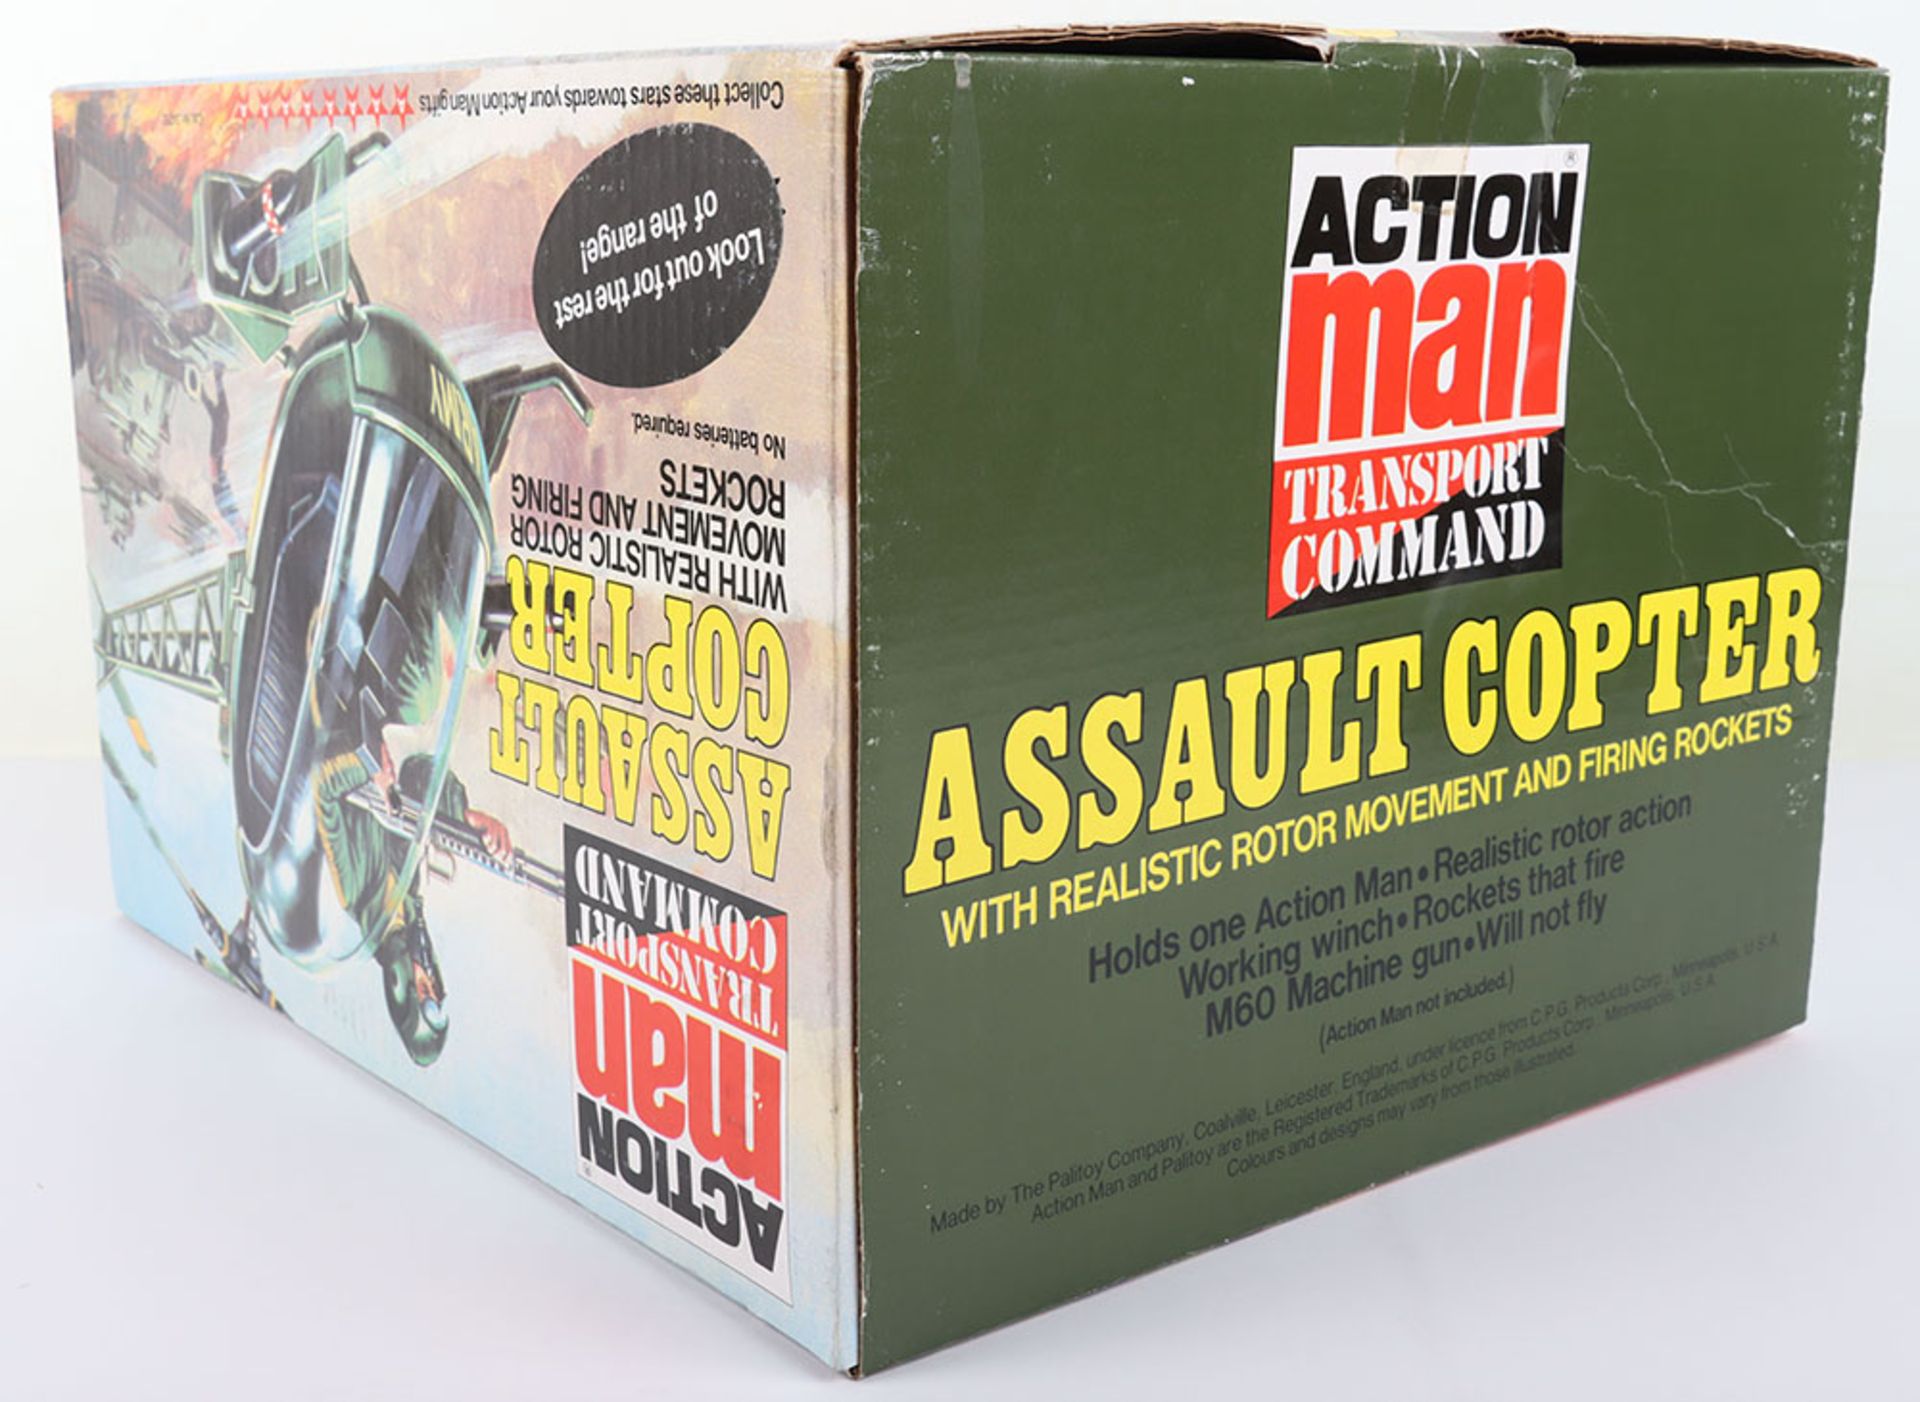 Palitoy Action Man Transport Command Assault Copter - Image 4 of 4